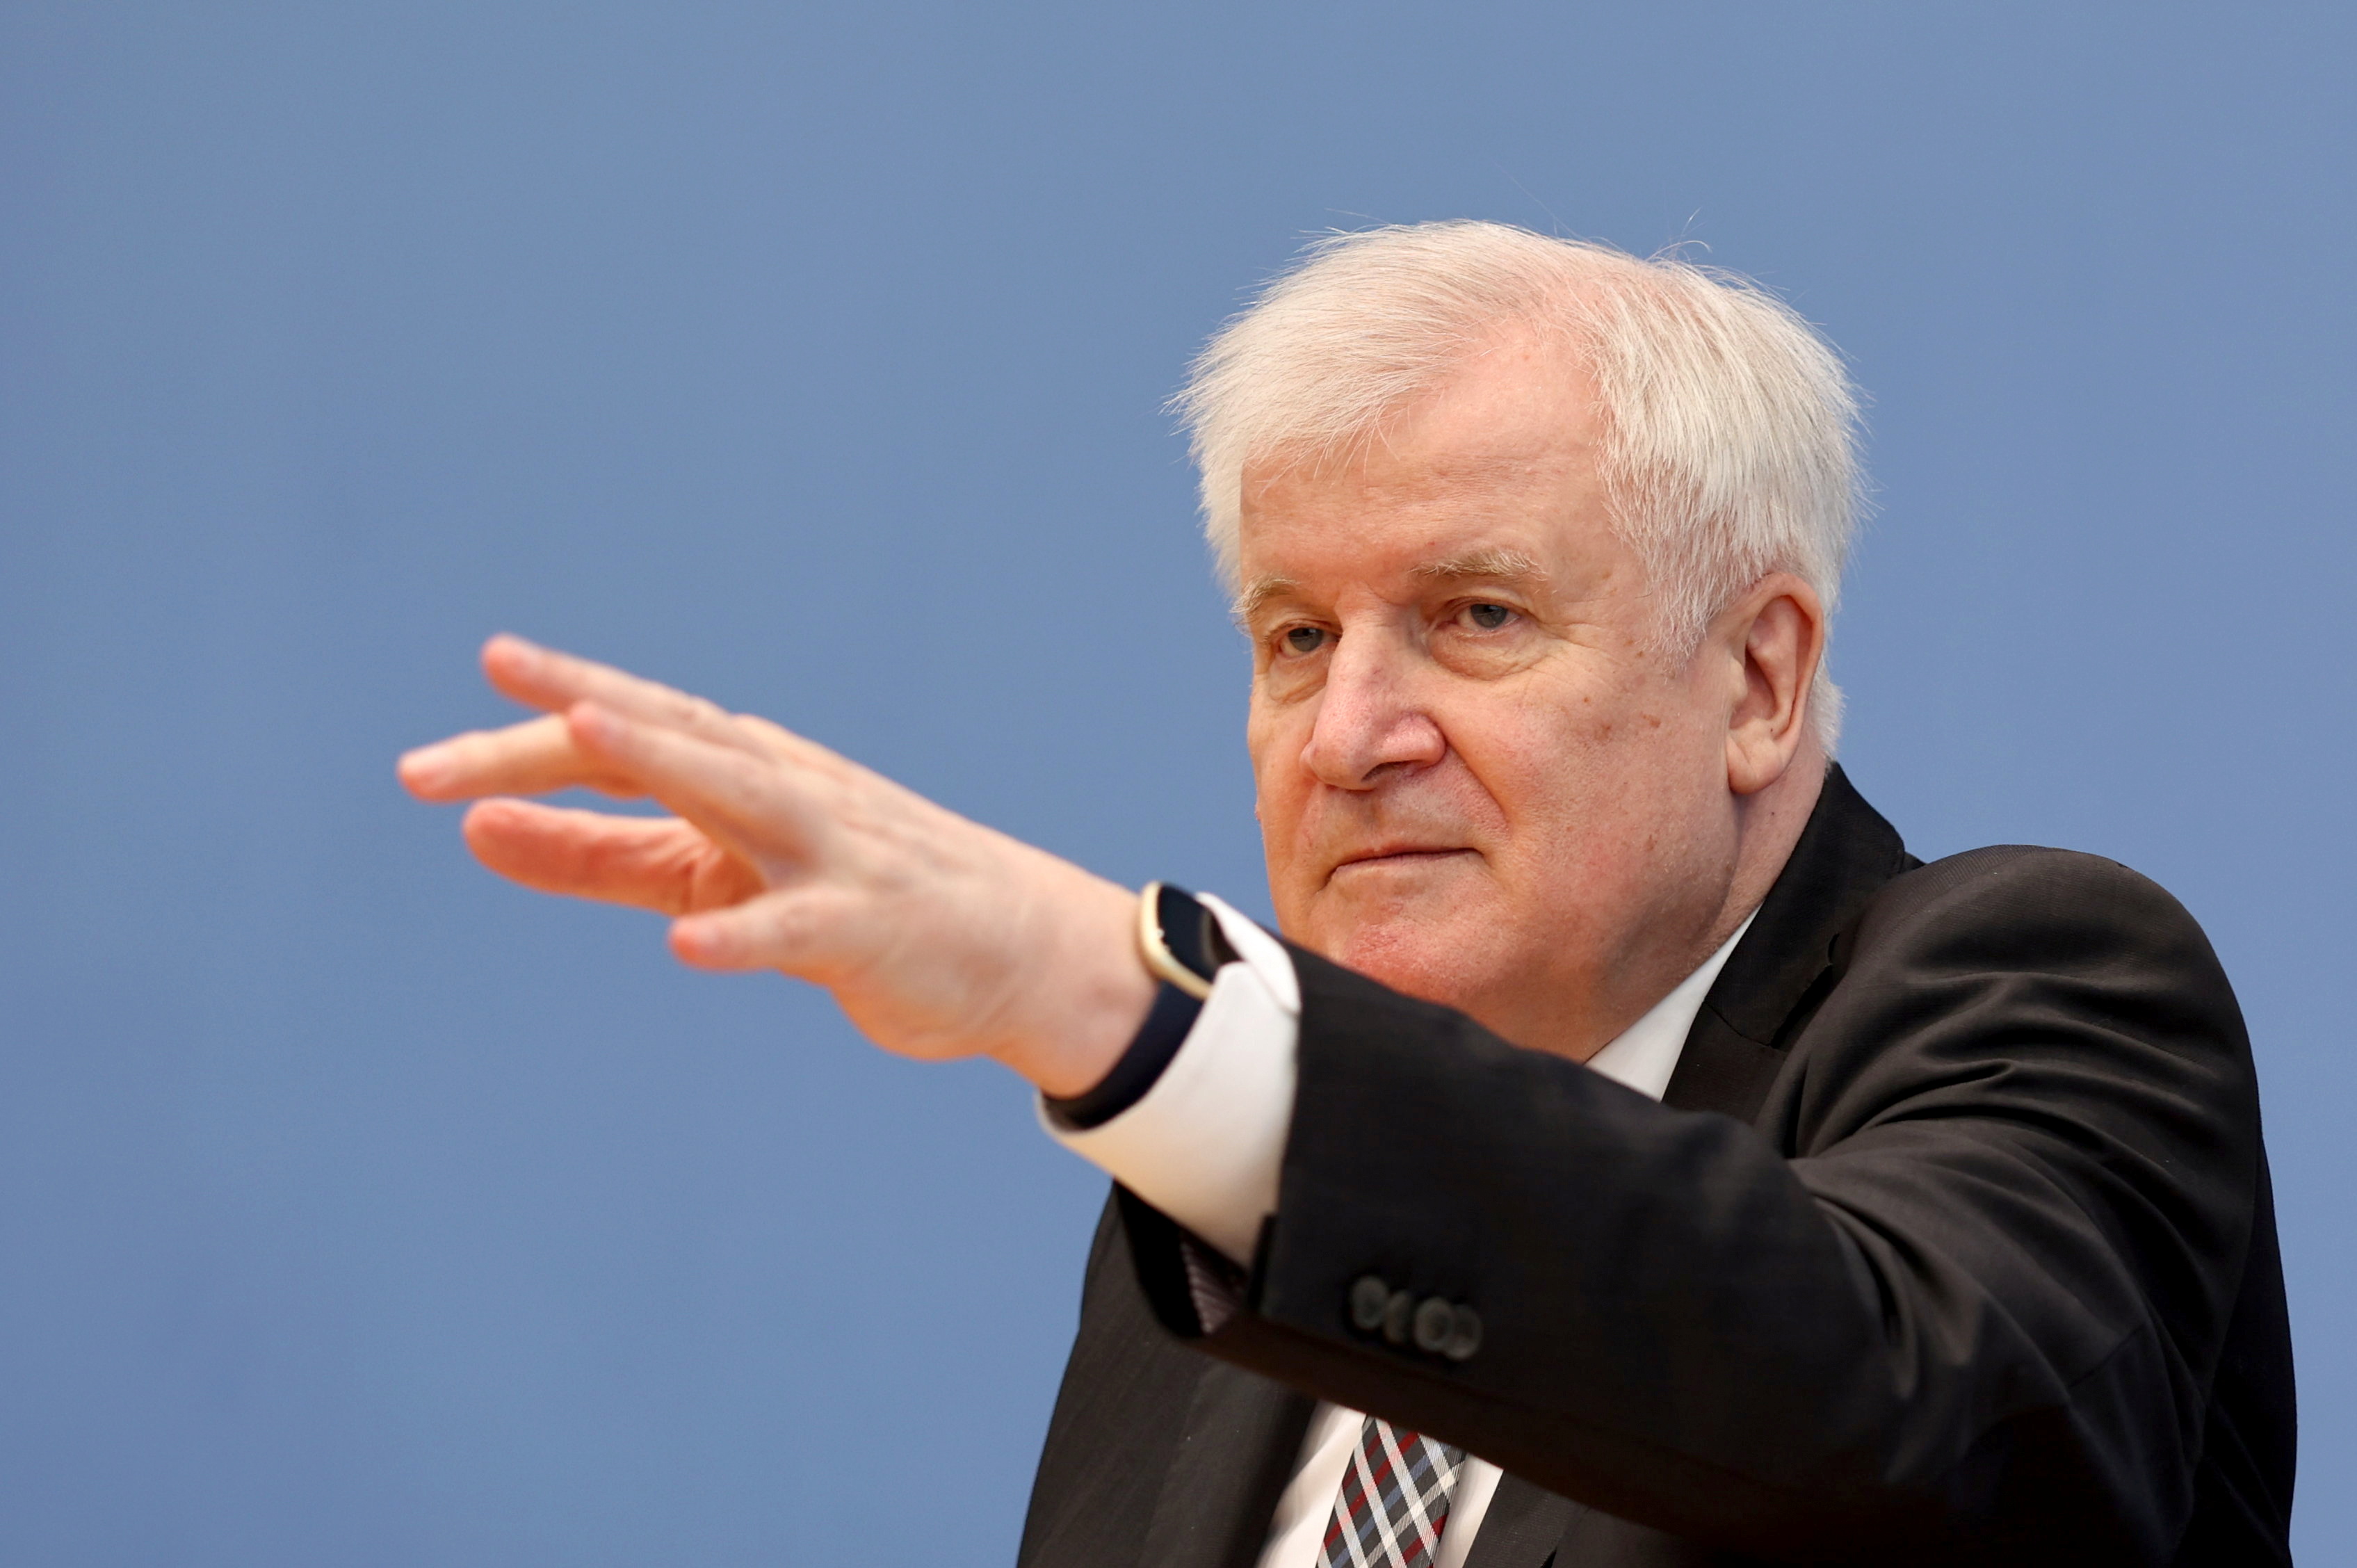 Germany's Interior Minister Horst Seehofer gestures as he attends a news conference on migration, in Berlin, Germany, October 20, 2021. REUTERS/Christian Mang/Pool